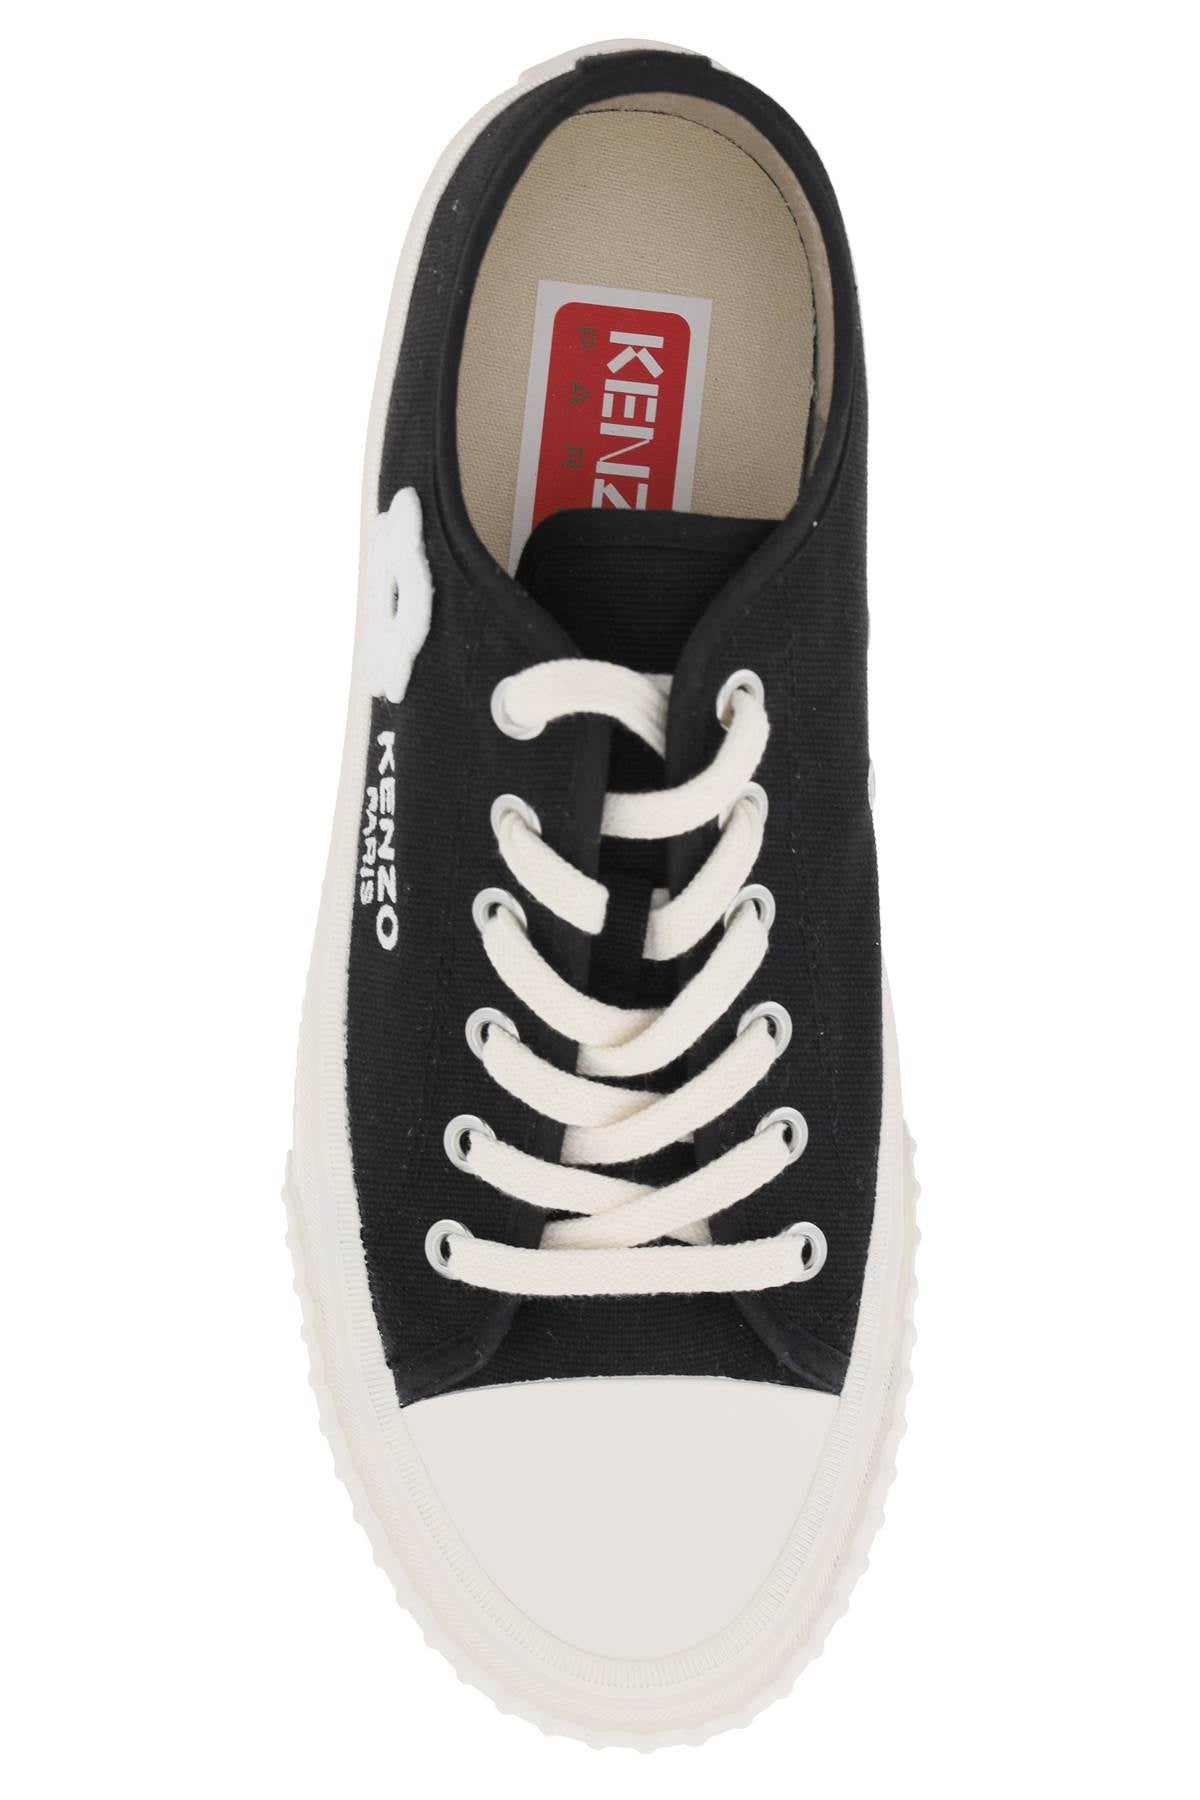 Kenzo foxy canvas sneakers for stylish-1